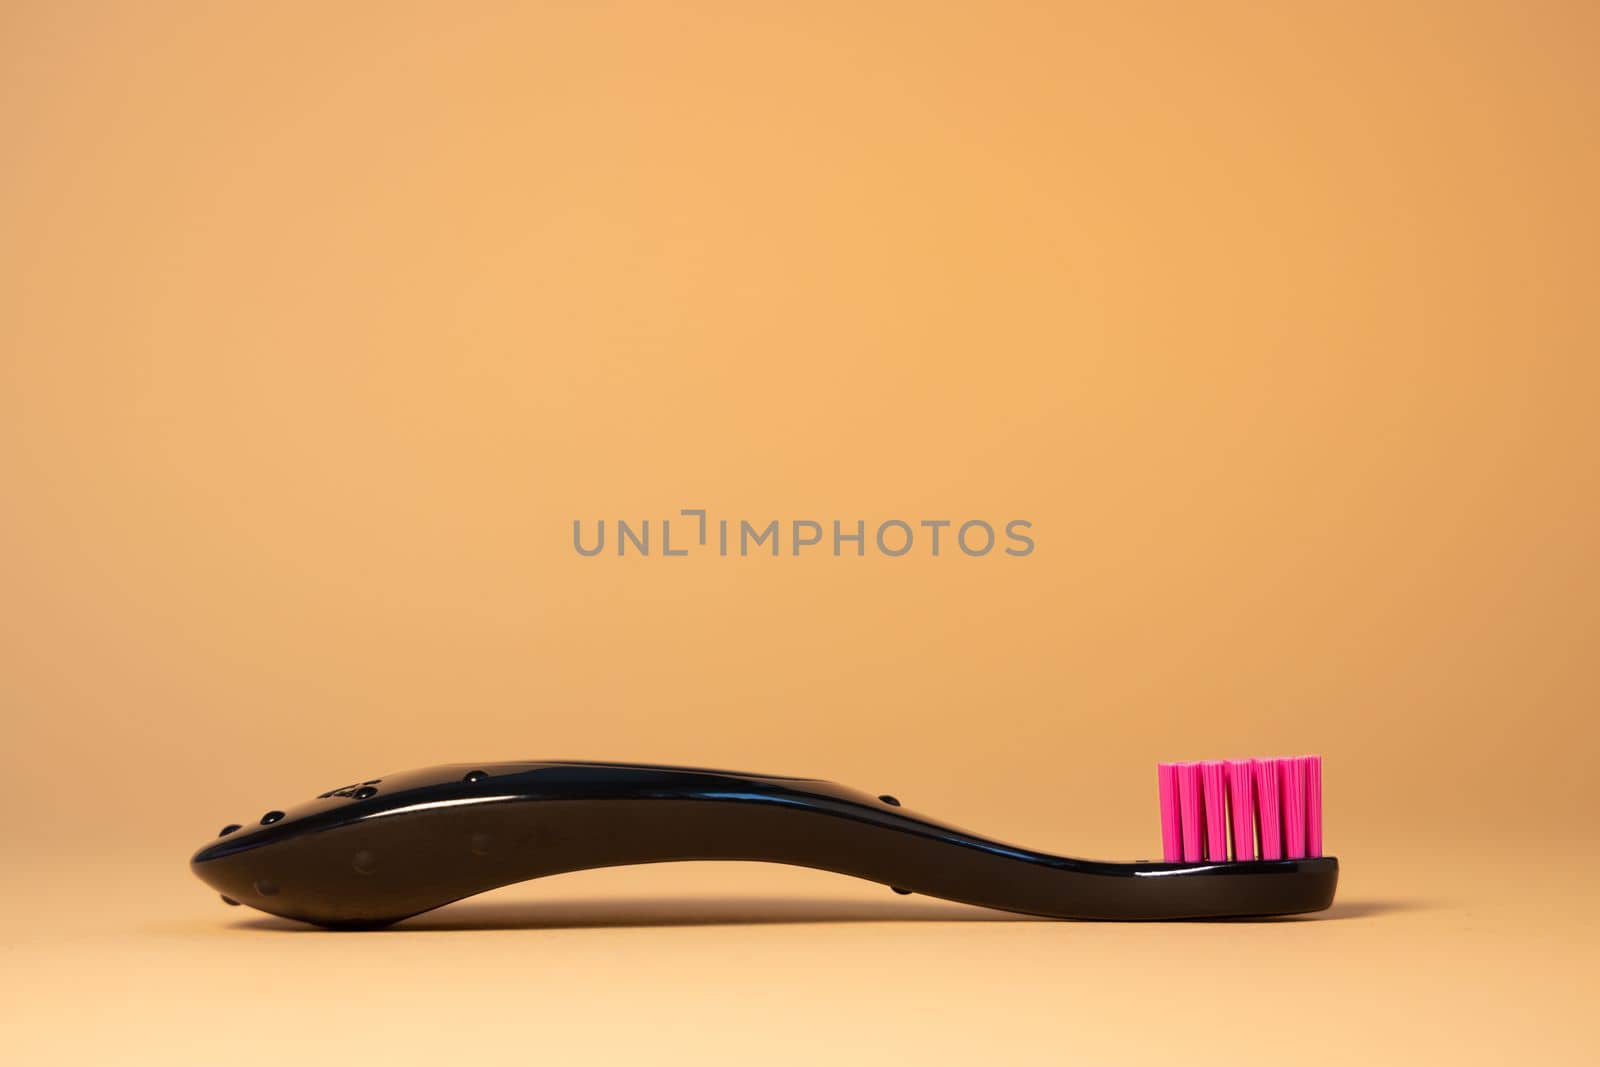 Neon pink plastic baby tooth brush on natural background. Dental and healthcare concept. by Ri6ka